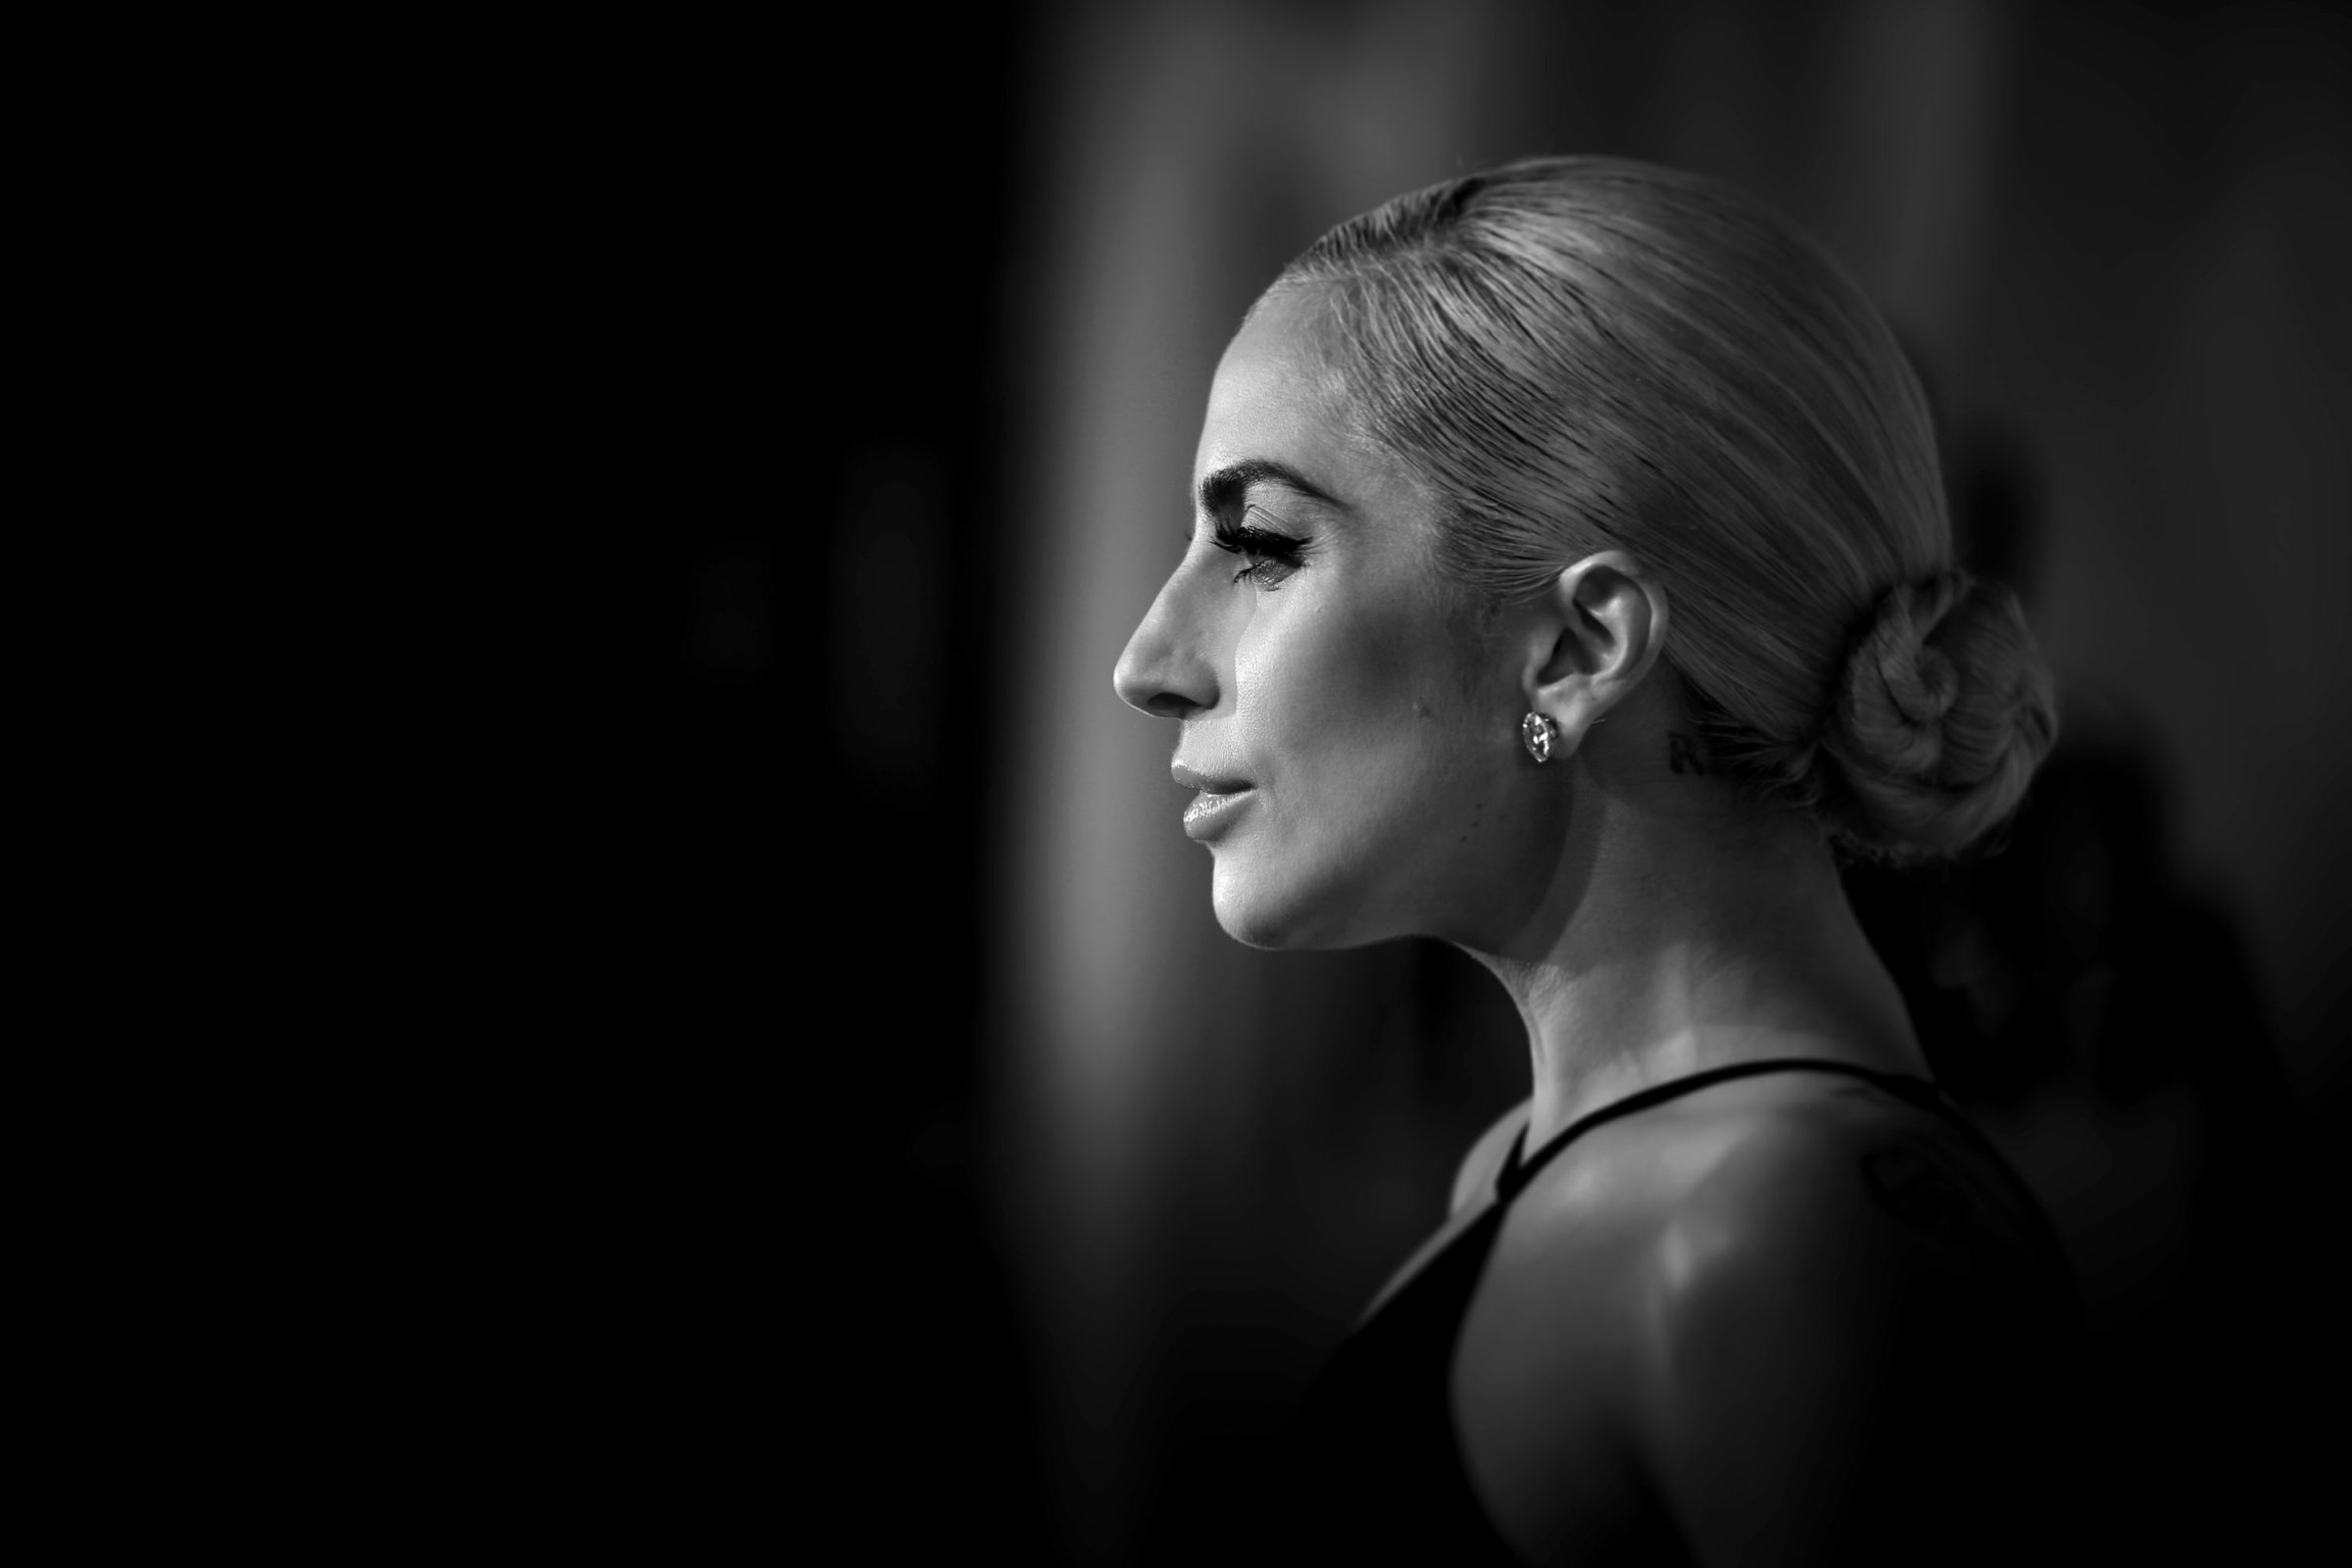 Lady Gaga attends The Fashion Awards 2016 on December 5, 2016 in London, United Kingdom.